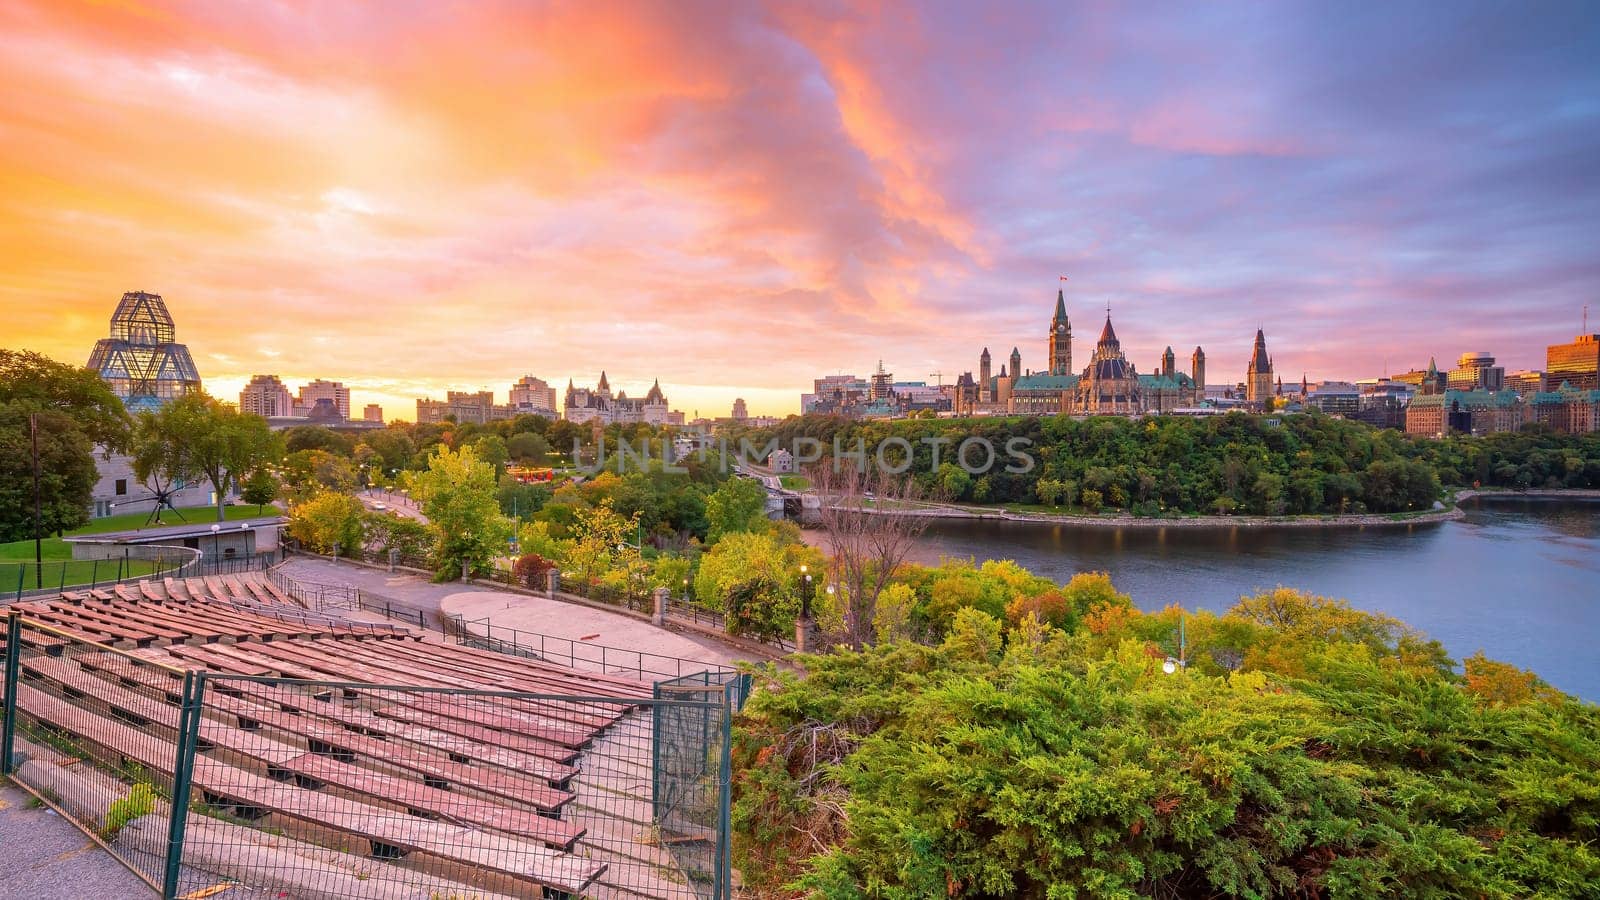 Cityscape skyline of Canada with Parliament hill in downtown Ottawa at sunset